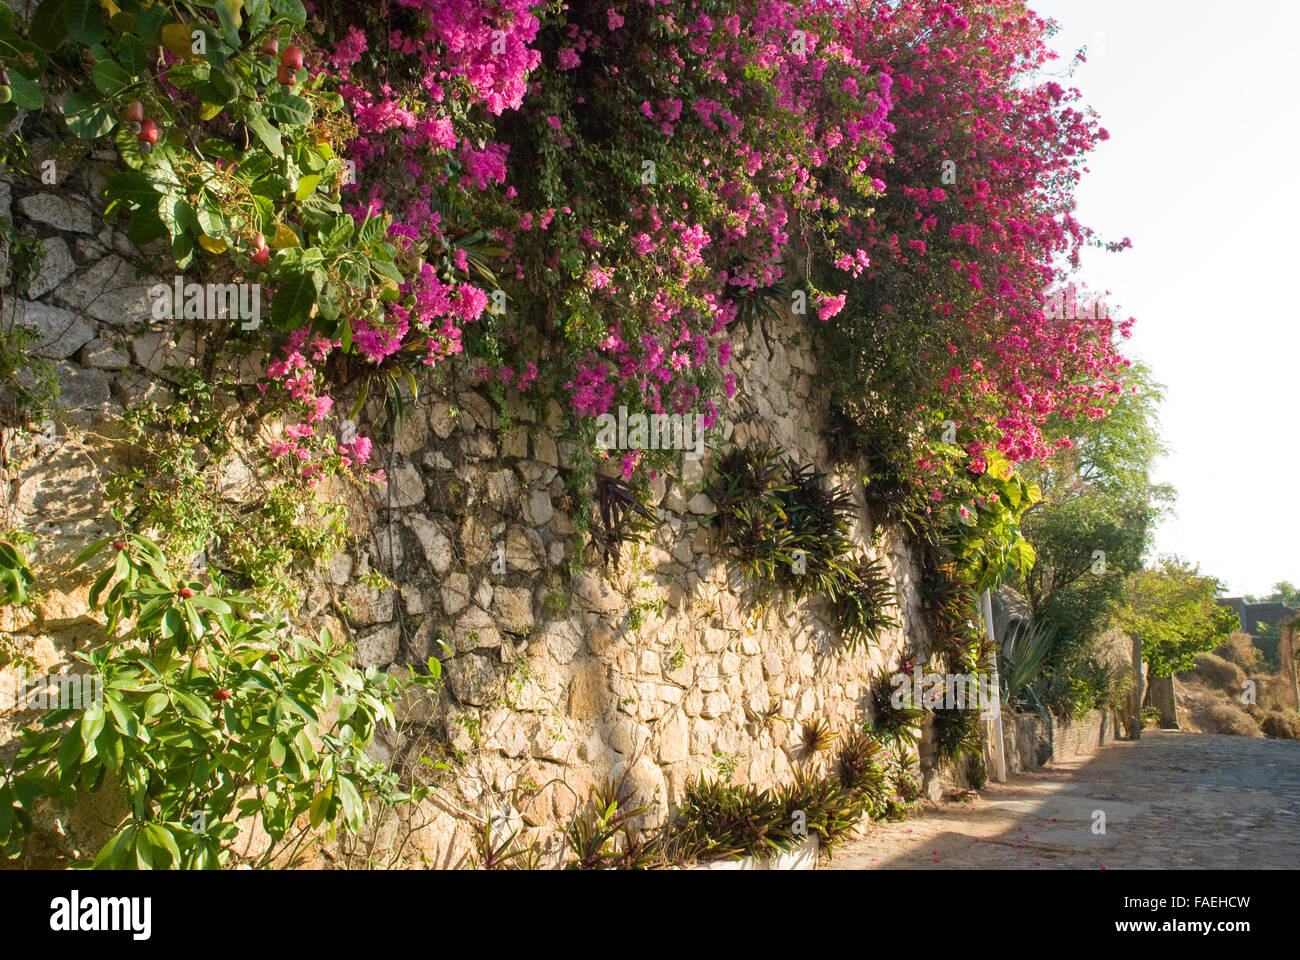 Bougainvillea vines growing on wall of home in Acapulco, Mexico Stock Photo